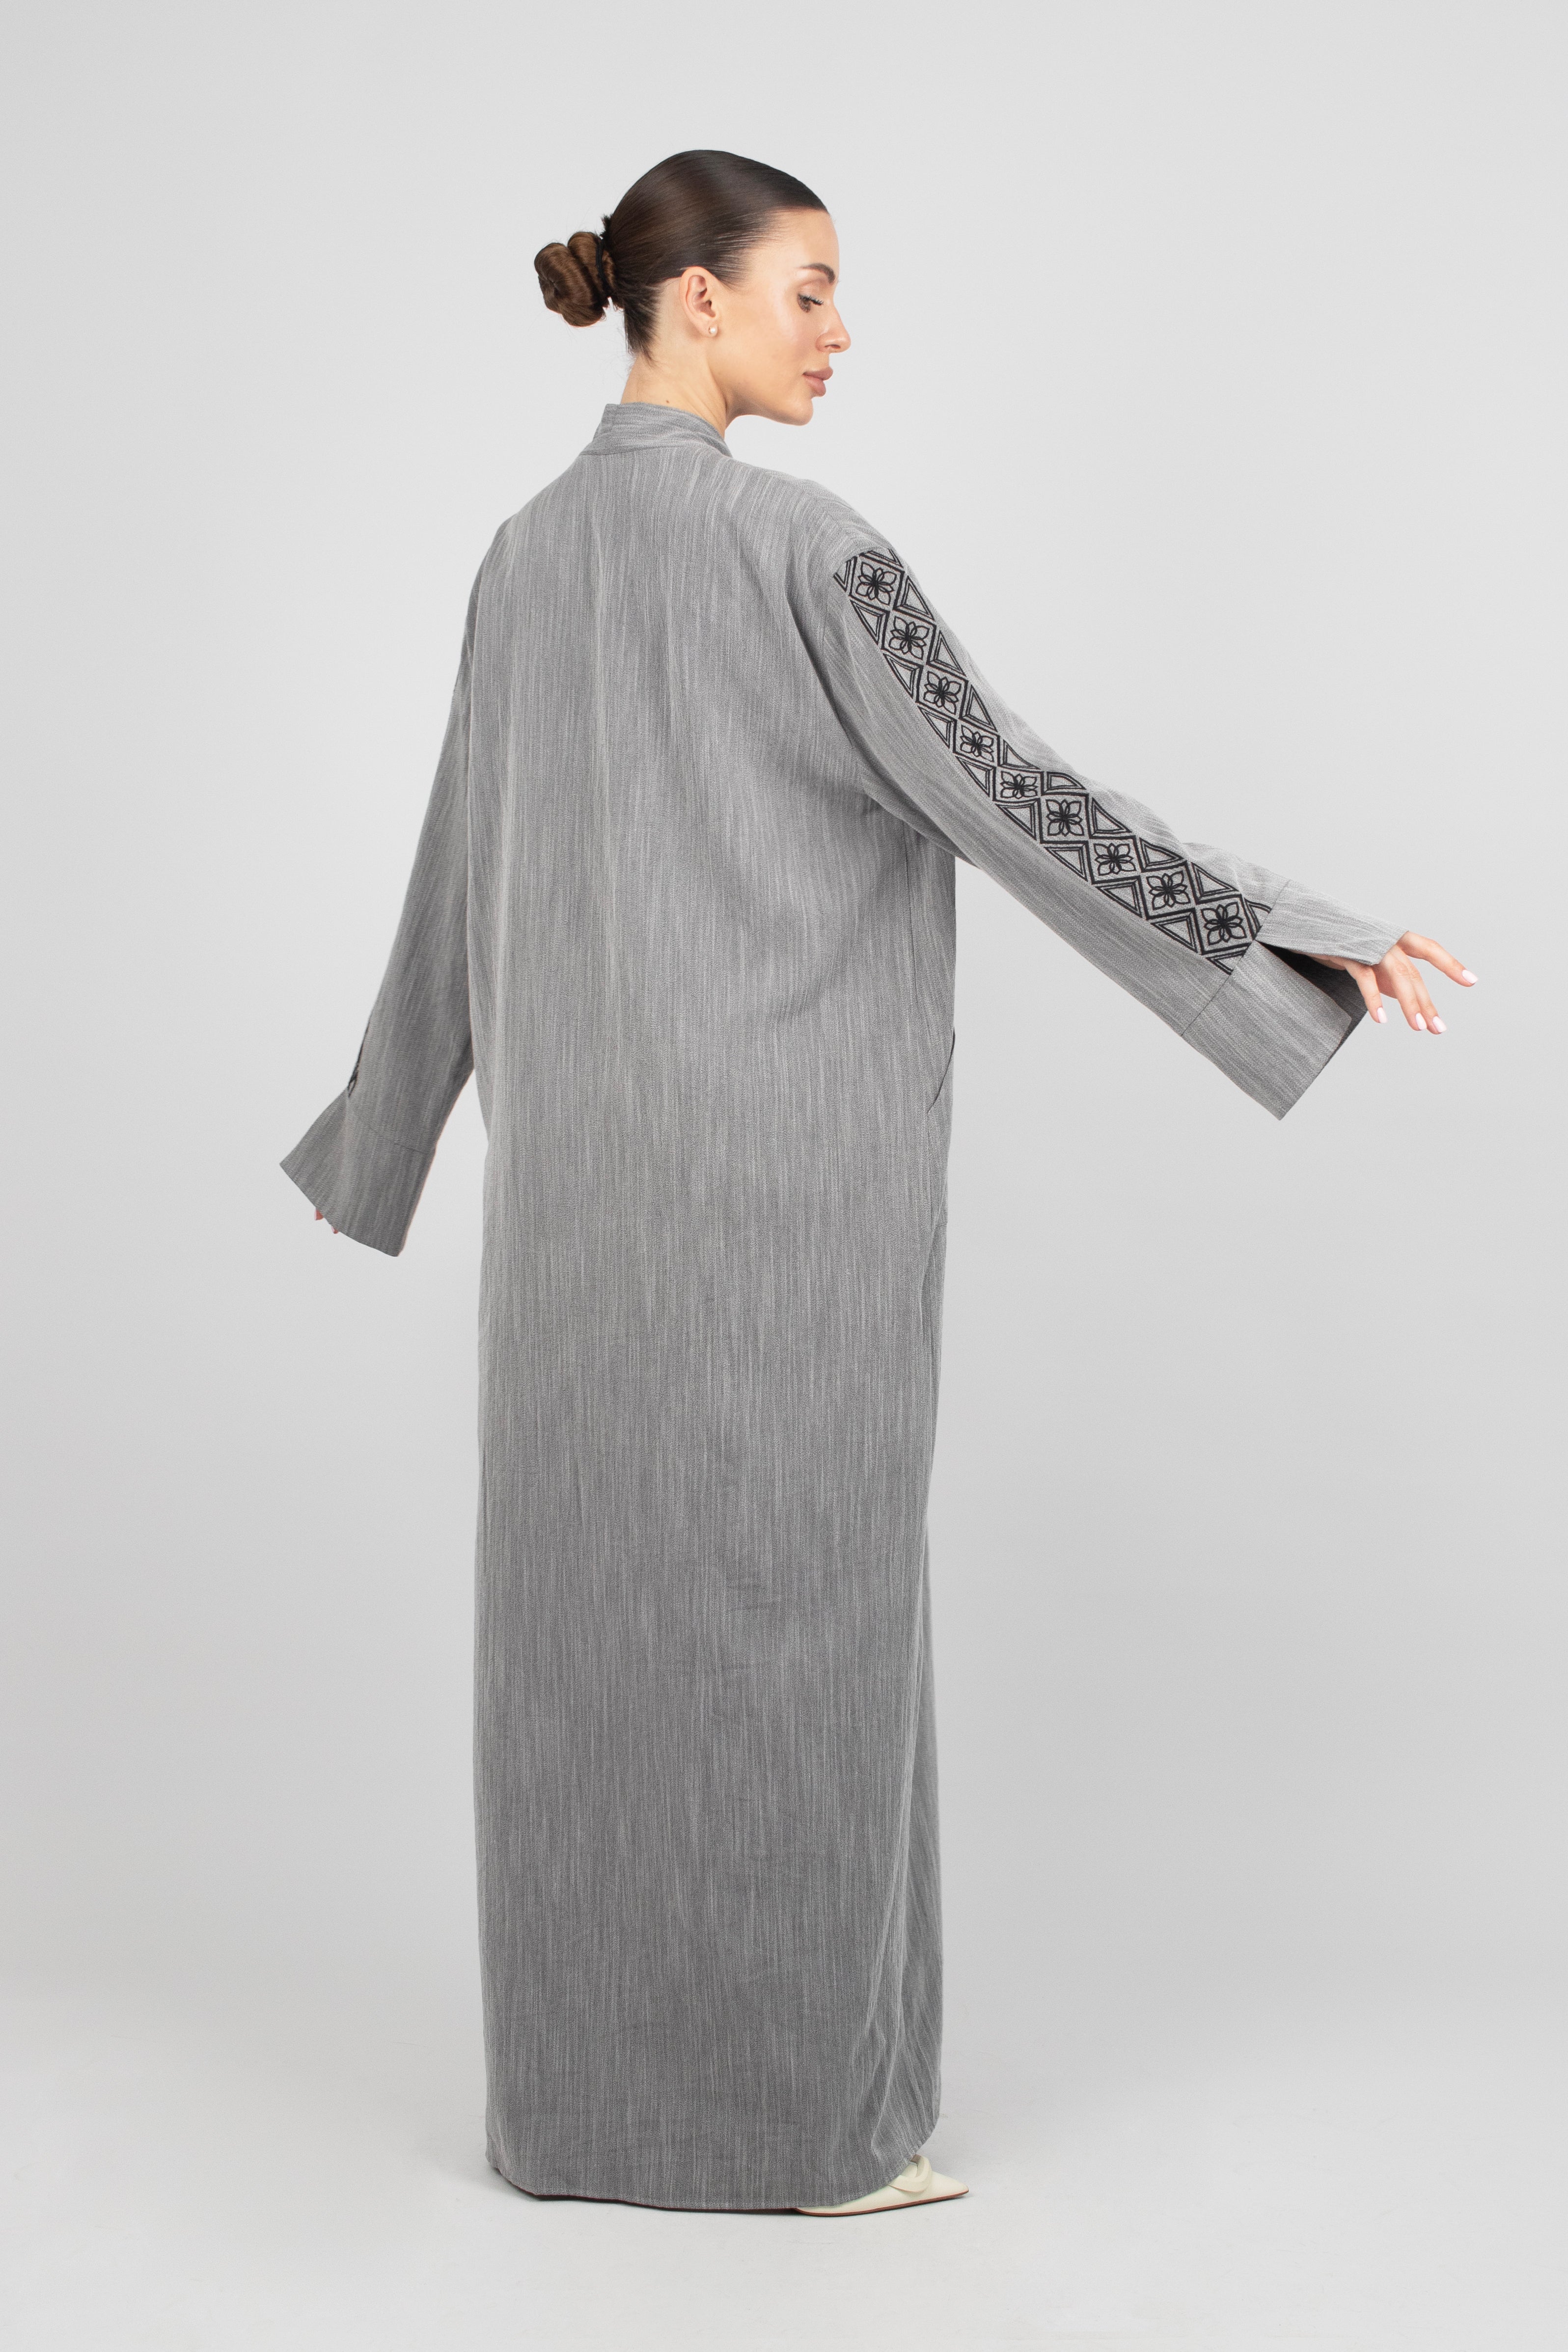 AE - Embroidered Sleeve Abaya - Sterling